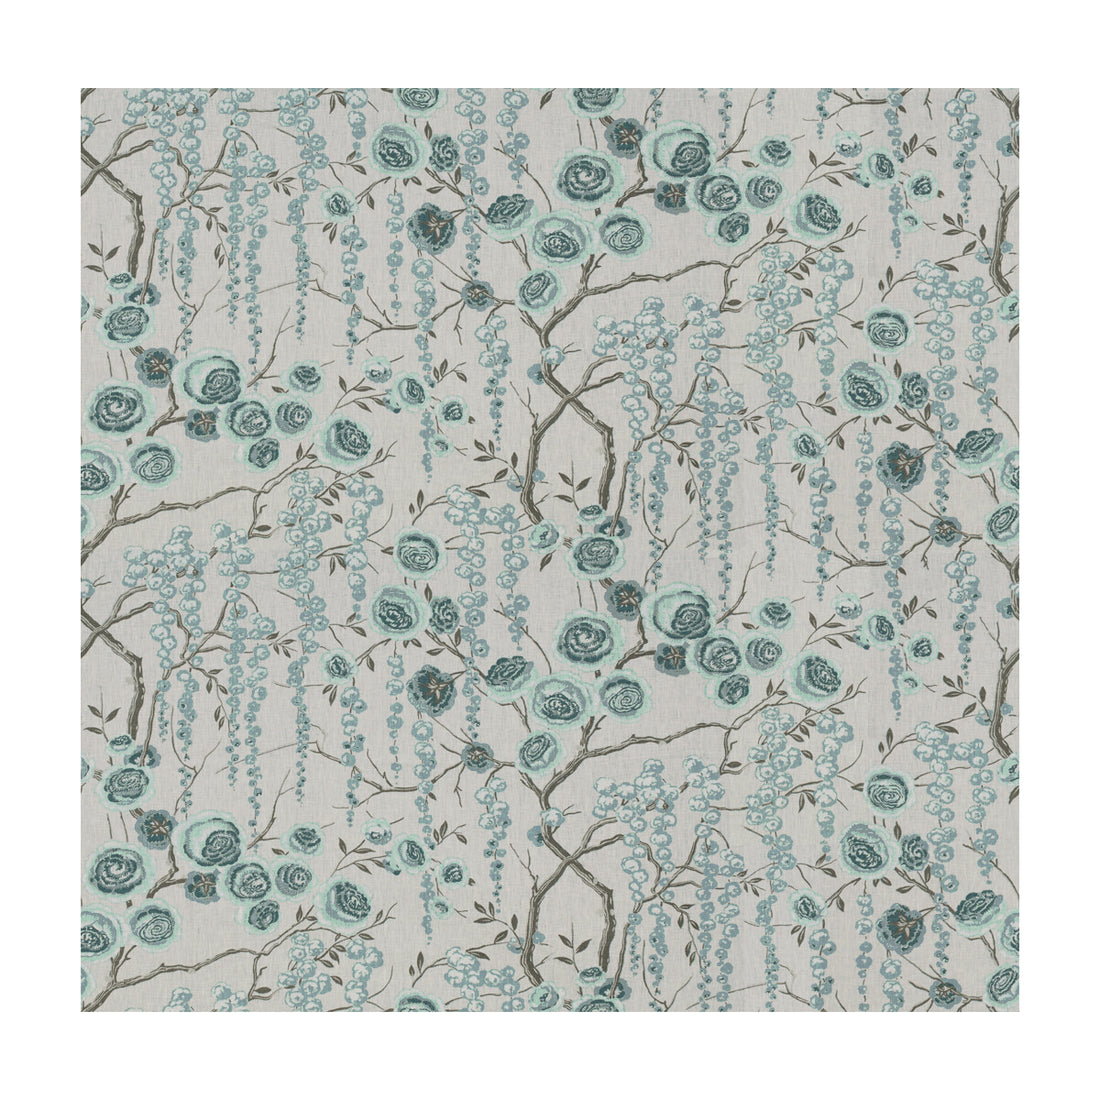 Peonytree fabric in aquamarine color - pattern PEONYTREE.511.0 - by Kravet Basics in the Sarah Richardson Harmony collection